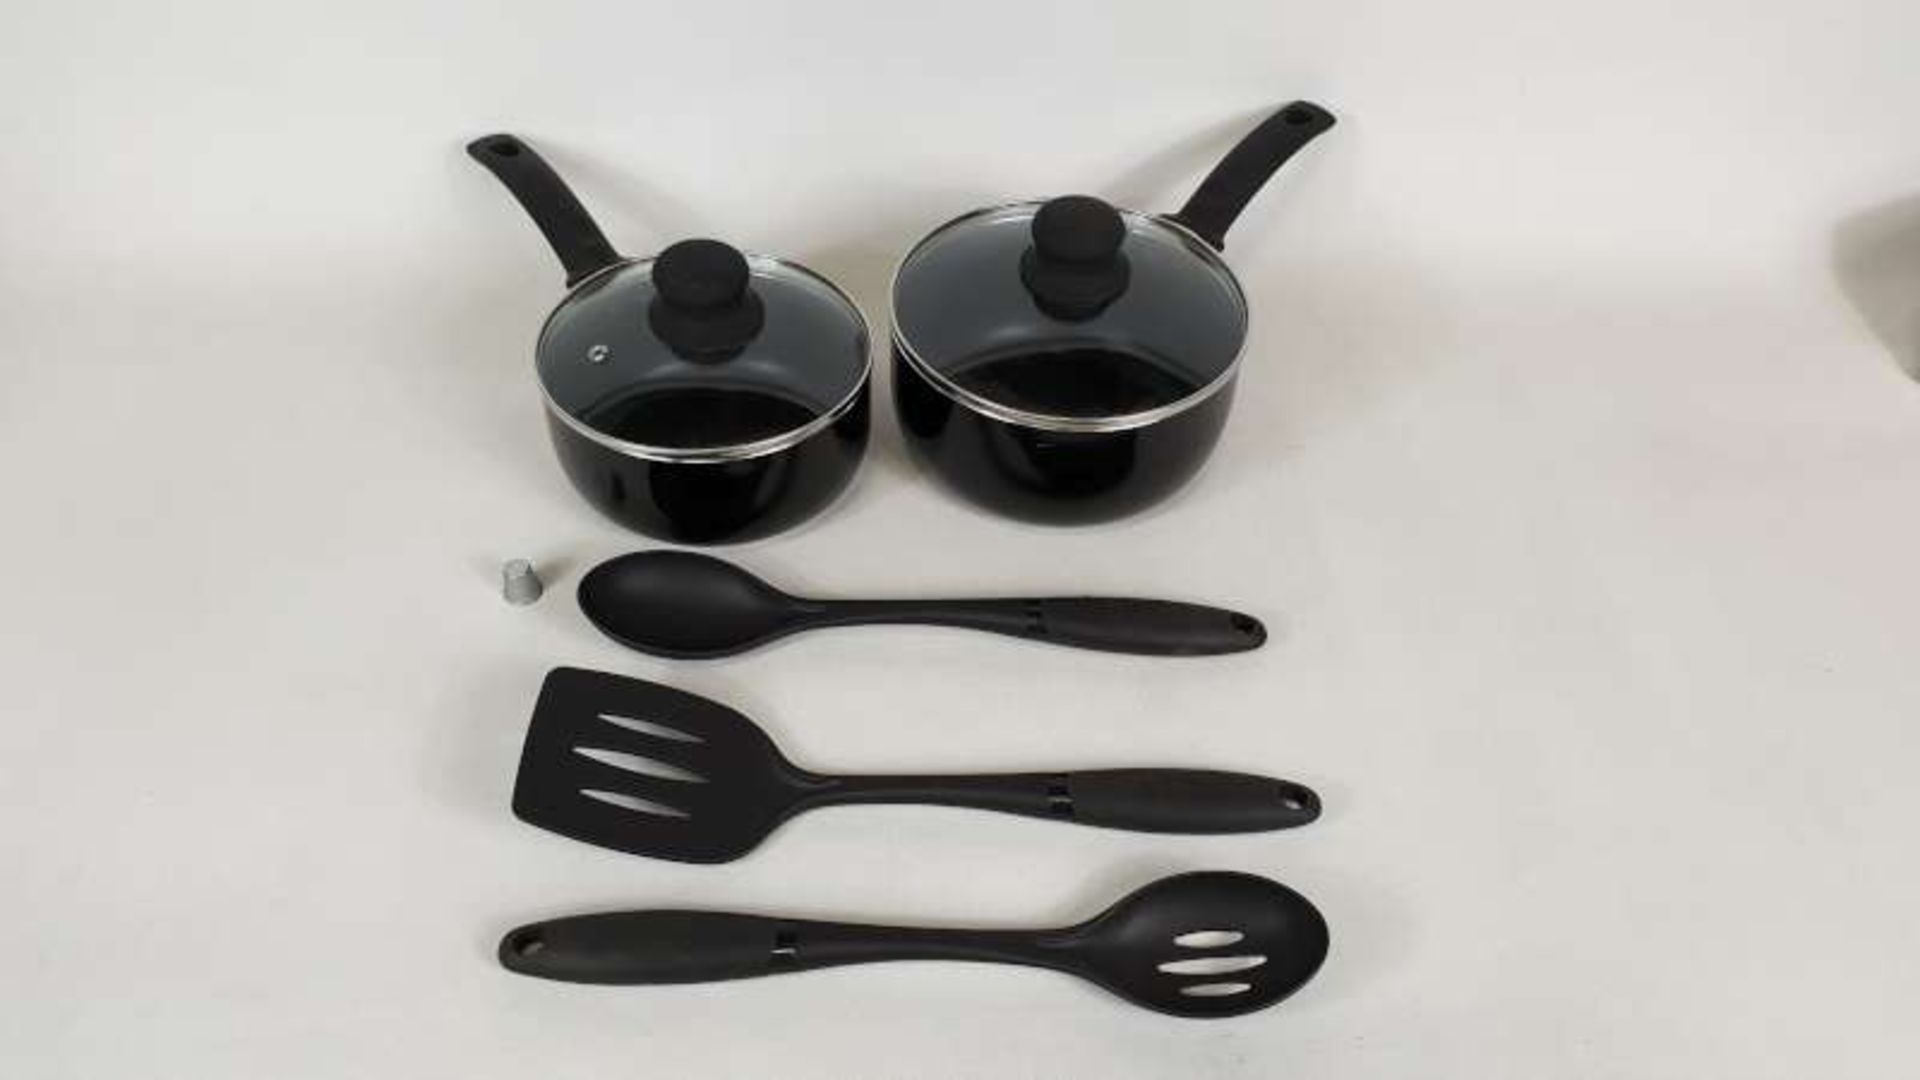 10 X BRAND NEW RUSSELL HOBBS PAN AND UTENSILS SETS, EACH SET CONTAINS 2 X PANS WITH LIDS AND 3 X